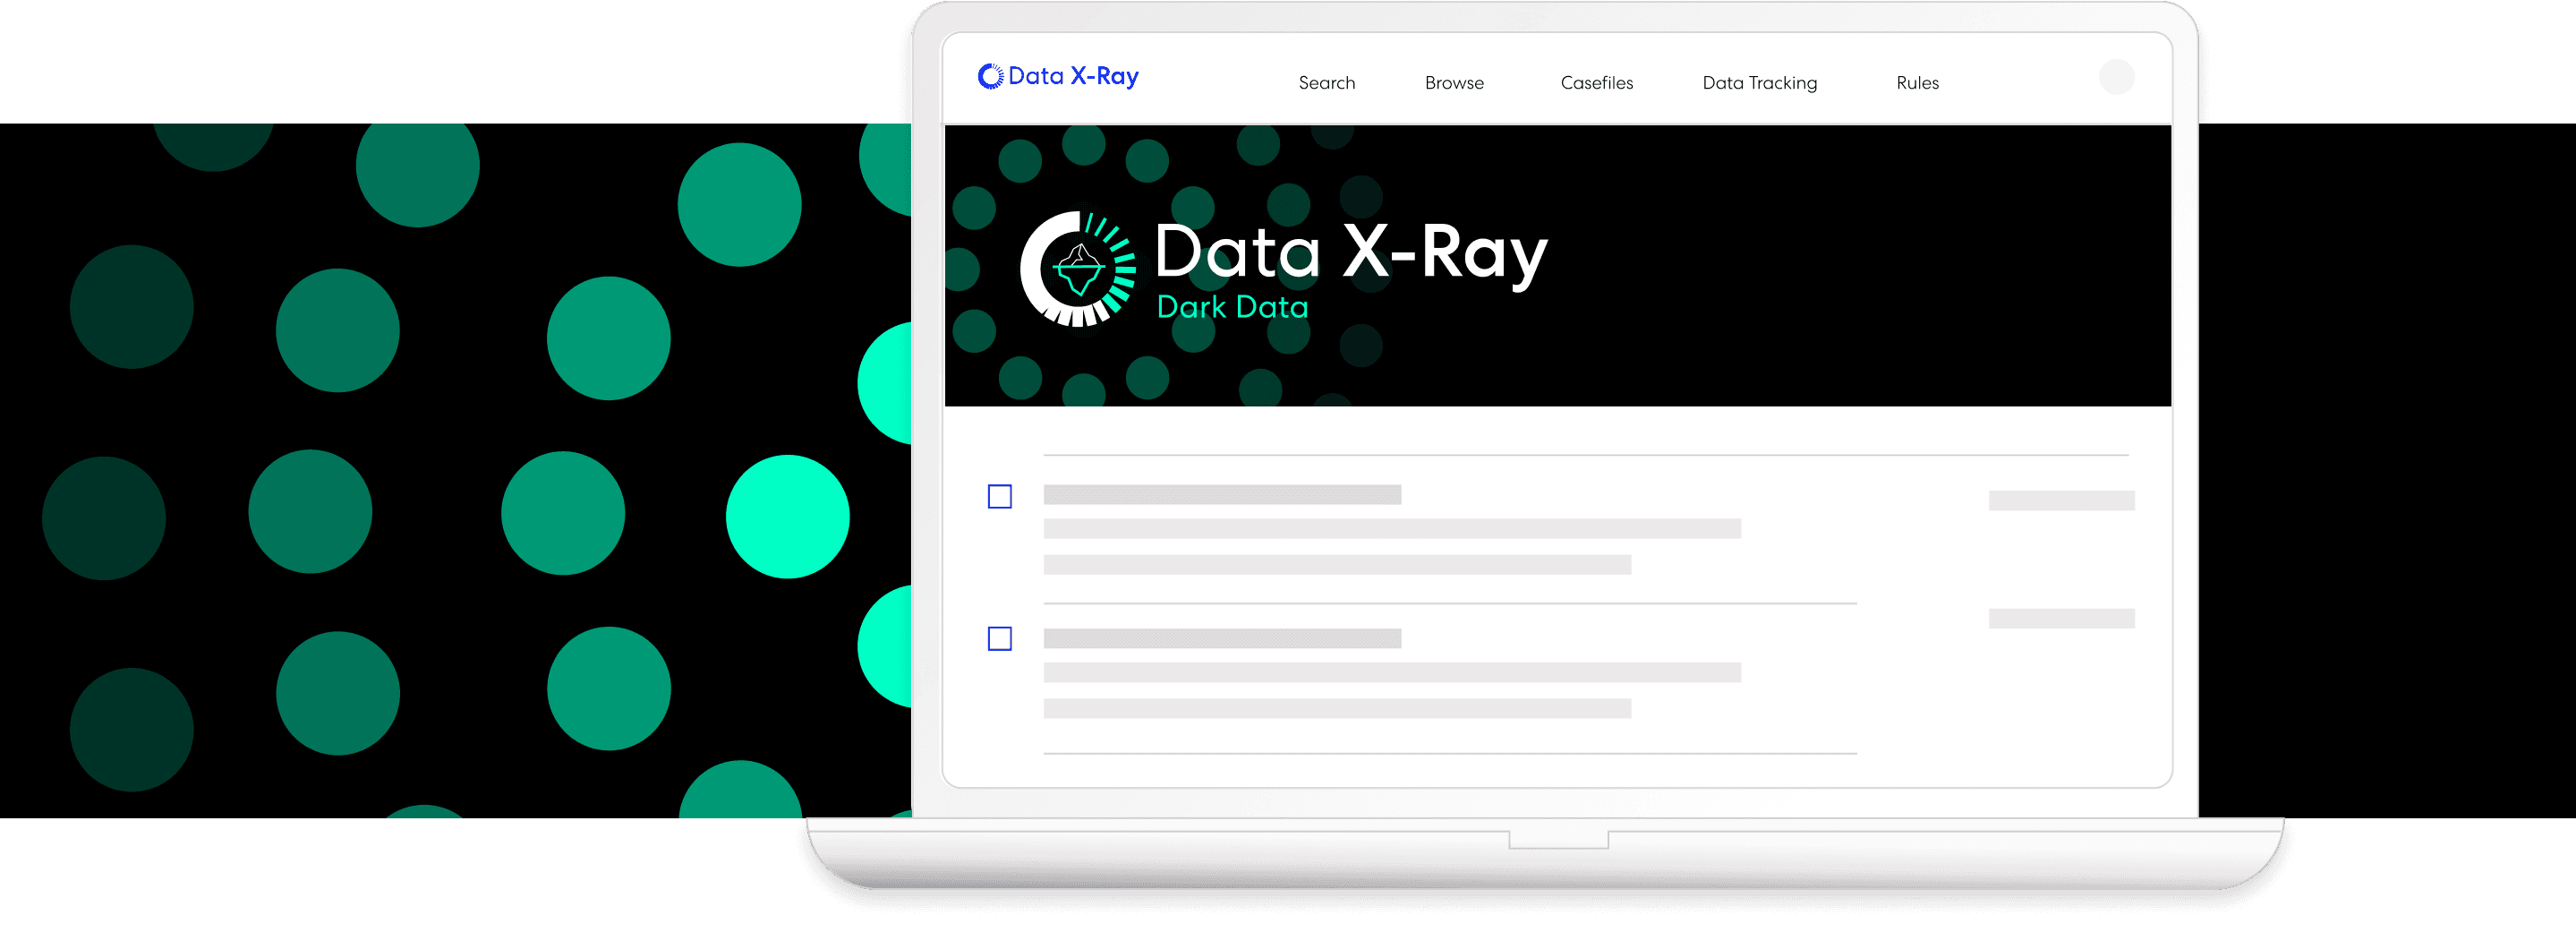 Data X-Ray for Dark Data Discovery, Classification and Redaction